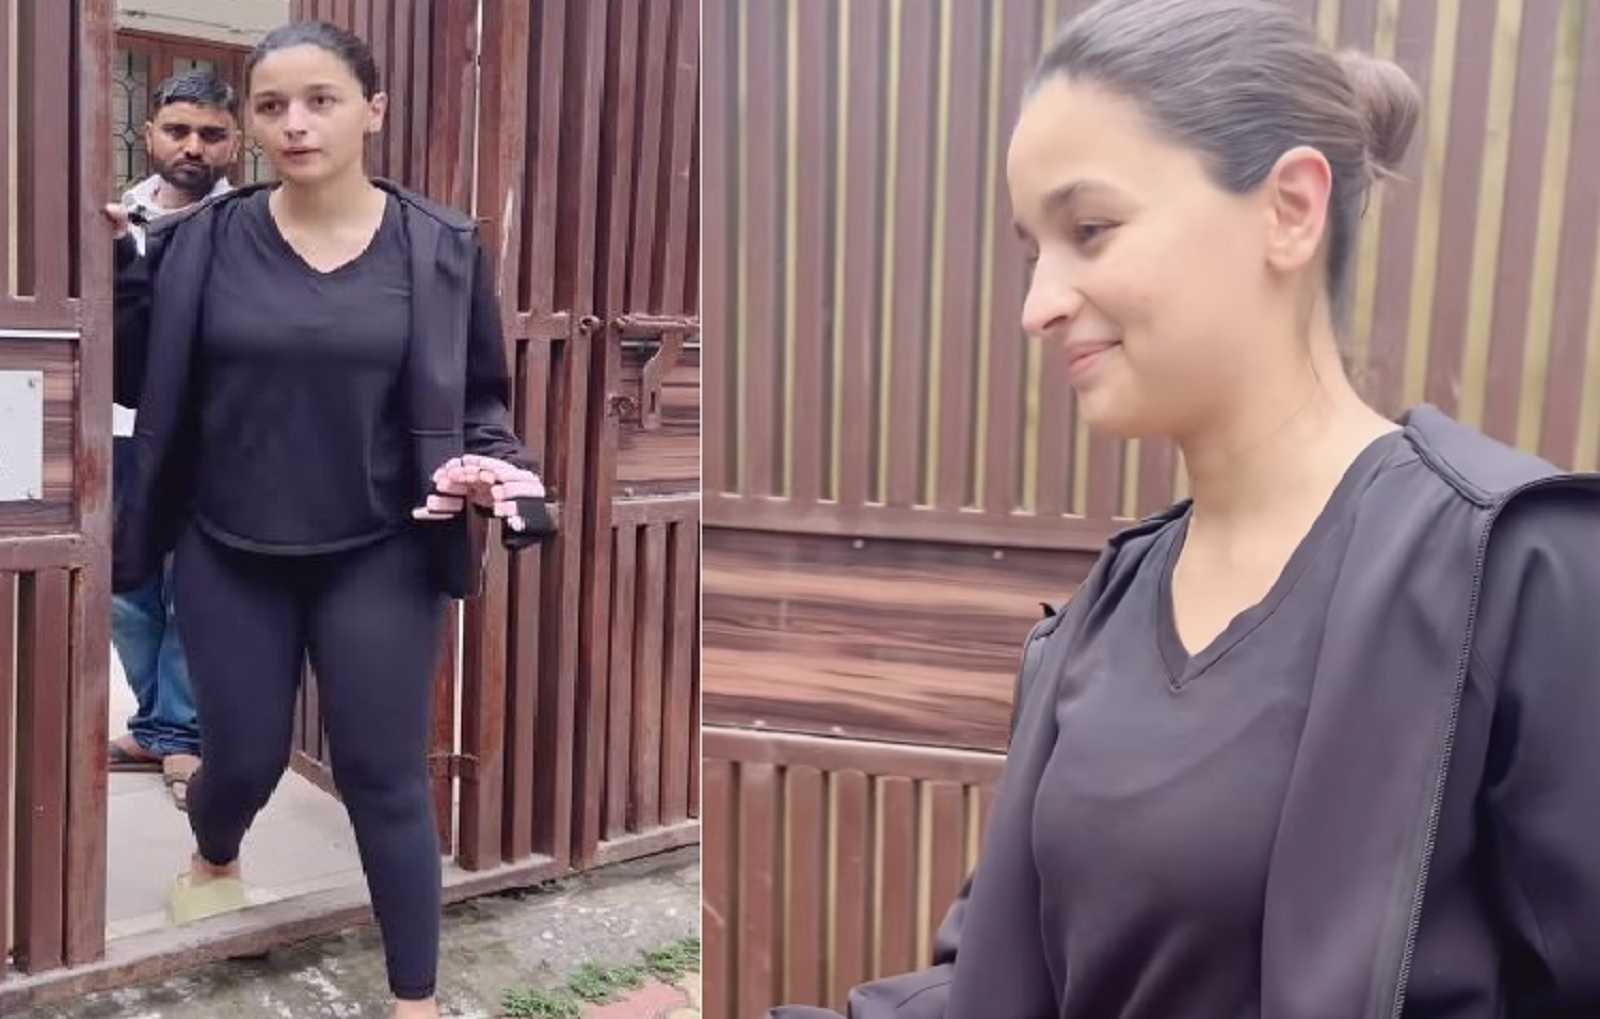 New mommy Alia Bhatt steps out to get back in shape, netizens worry about her daughter Raha Kapoor